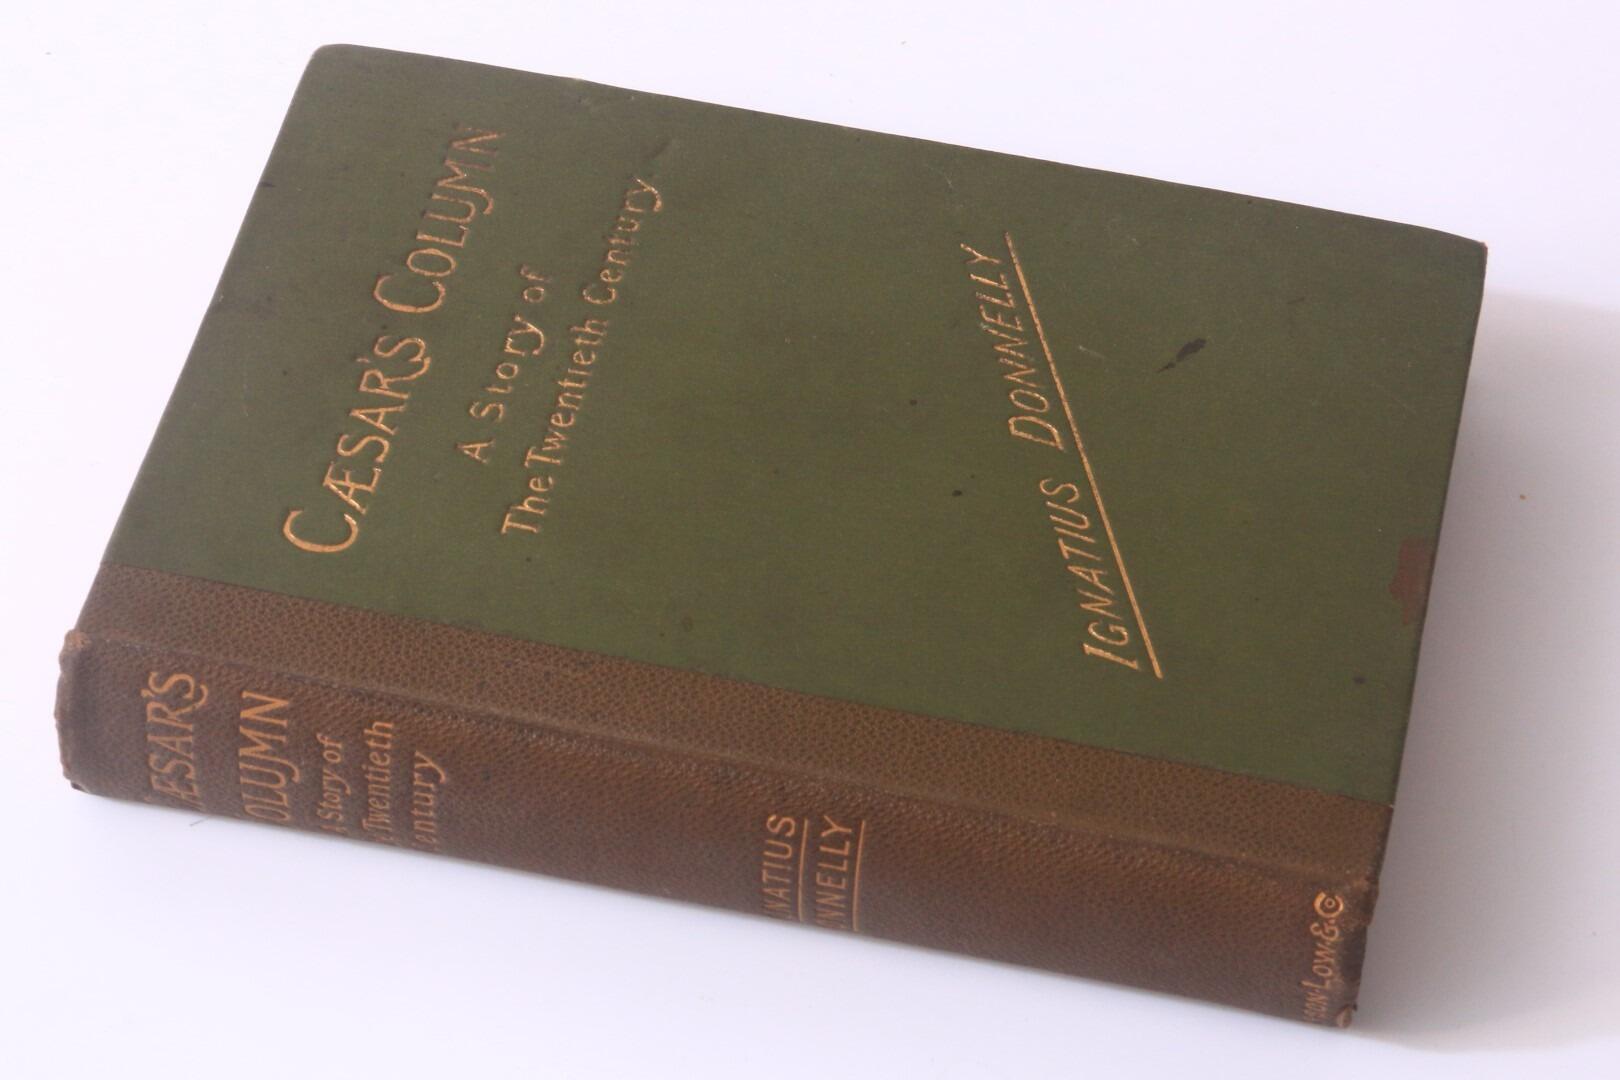 Ignatius Donnelly - Caesar's Column: A Story of the Twentieth Century - Sampson Low, Marston & Co., 1891, First Edition.